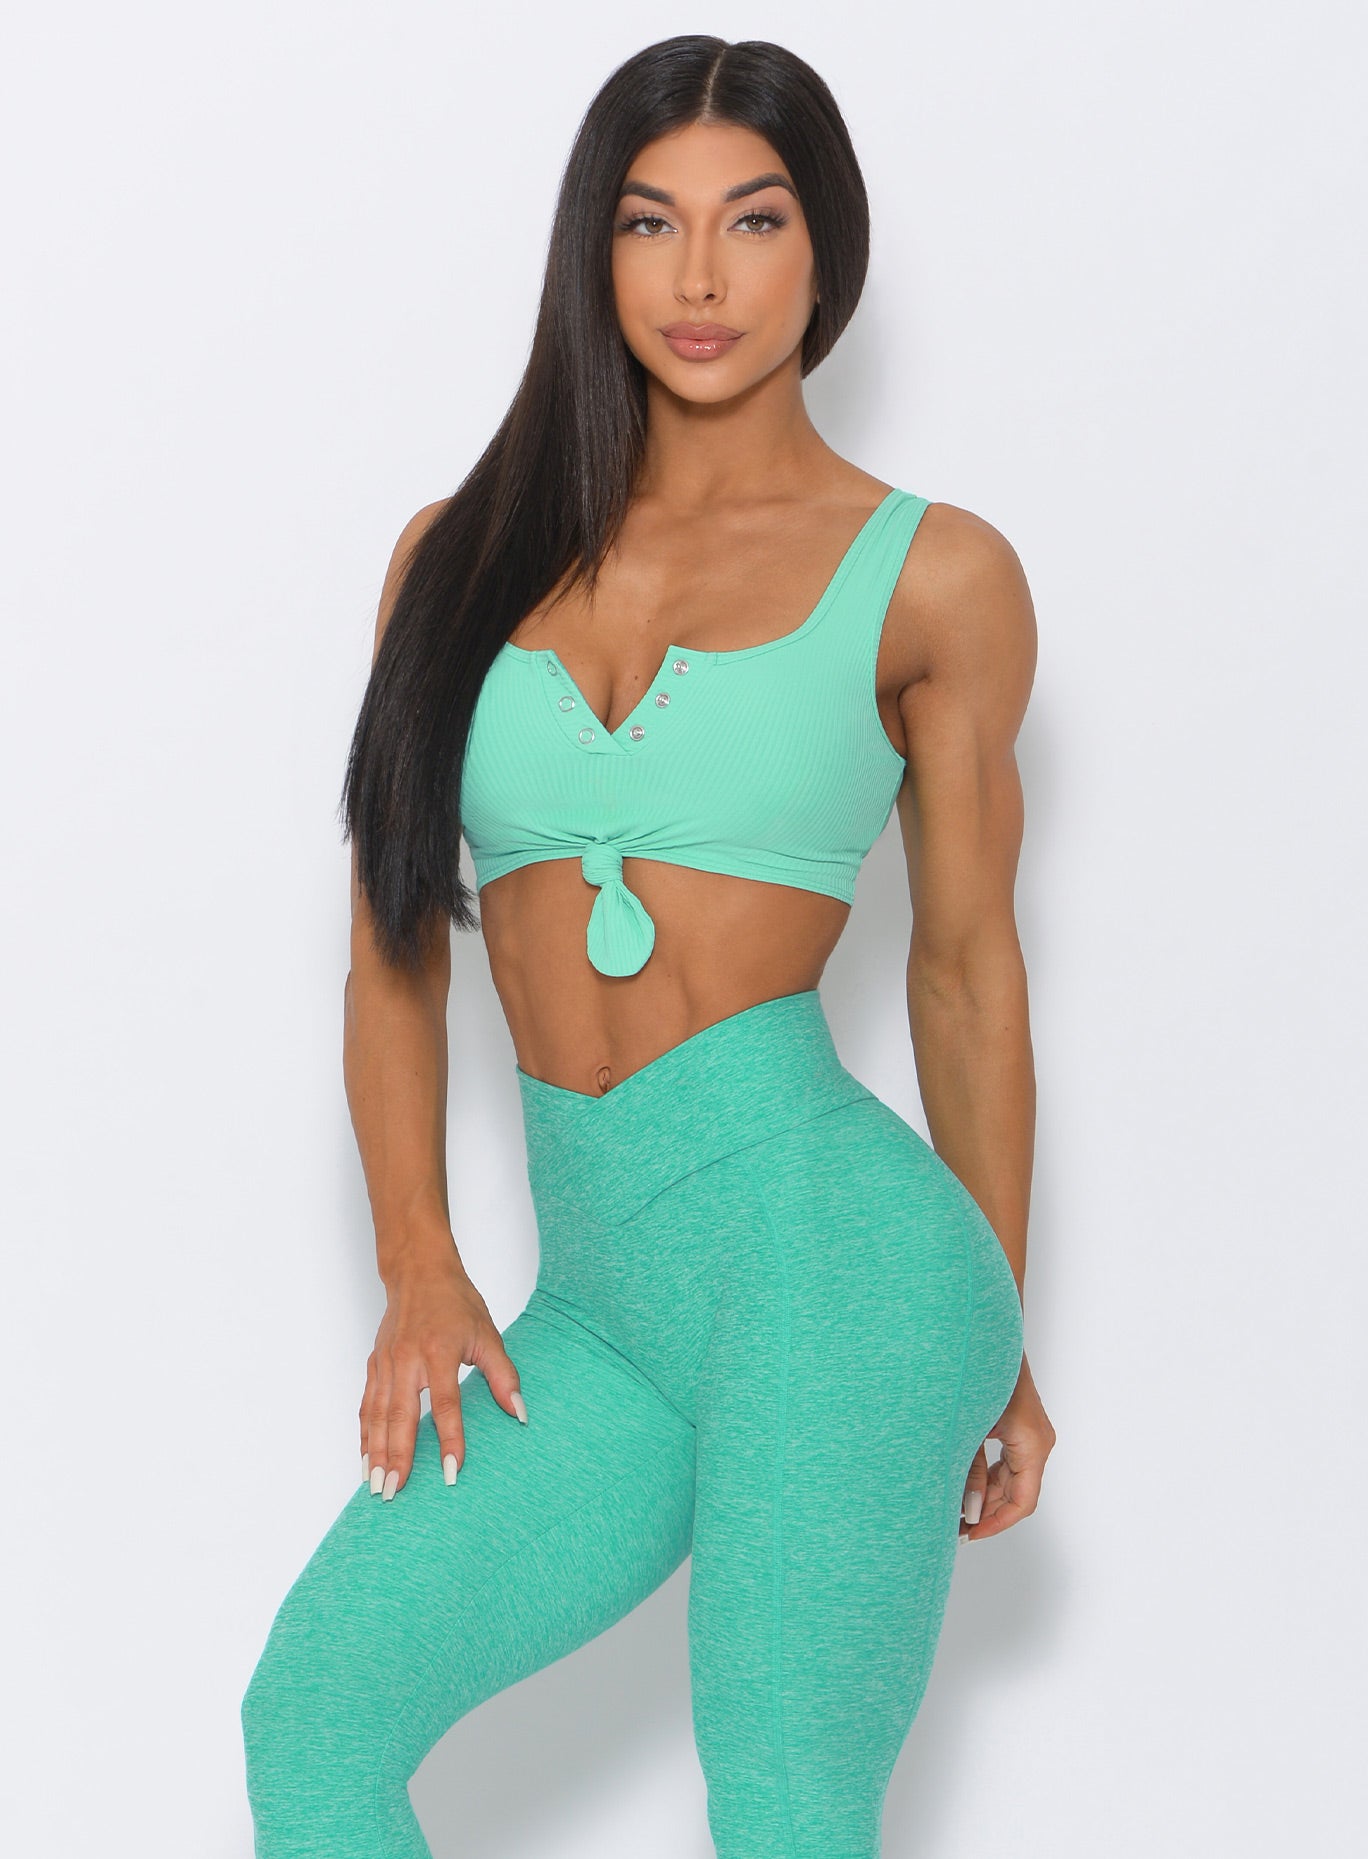 Front profile view of the model in our mint henley sports bra and a matching bra